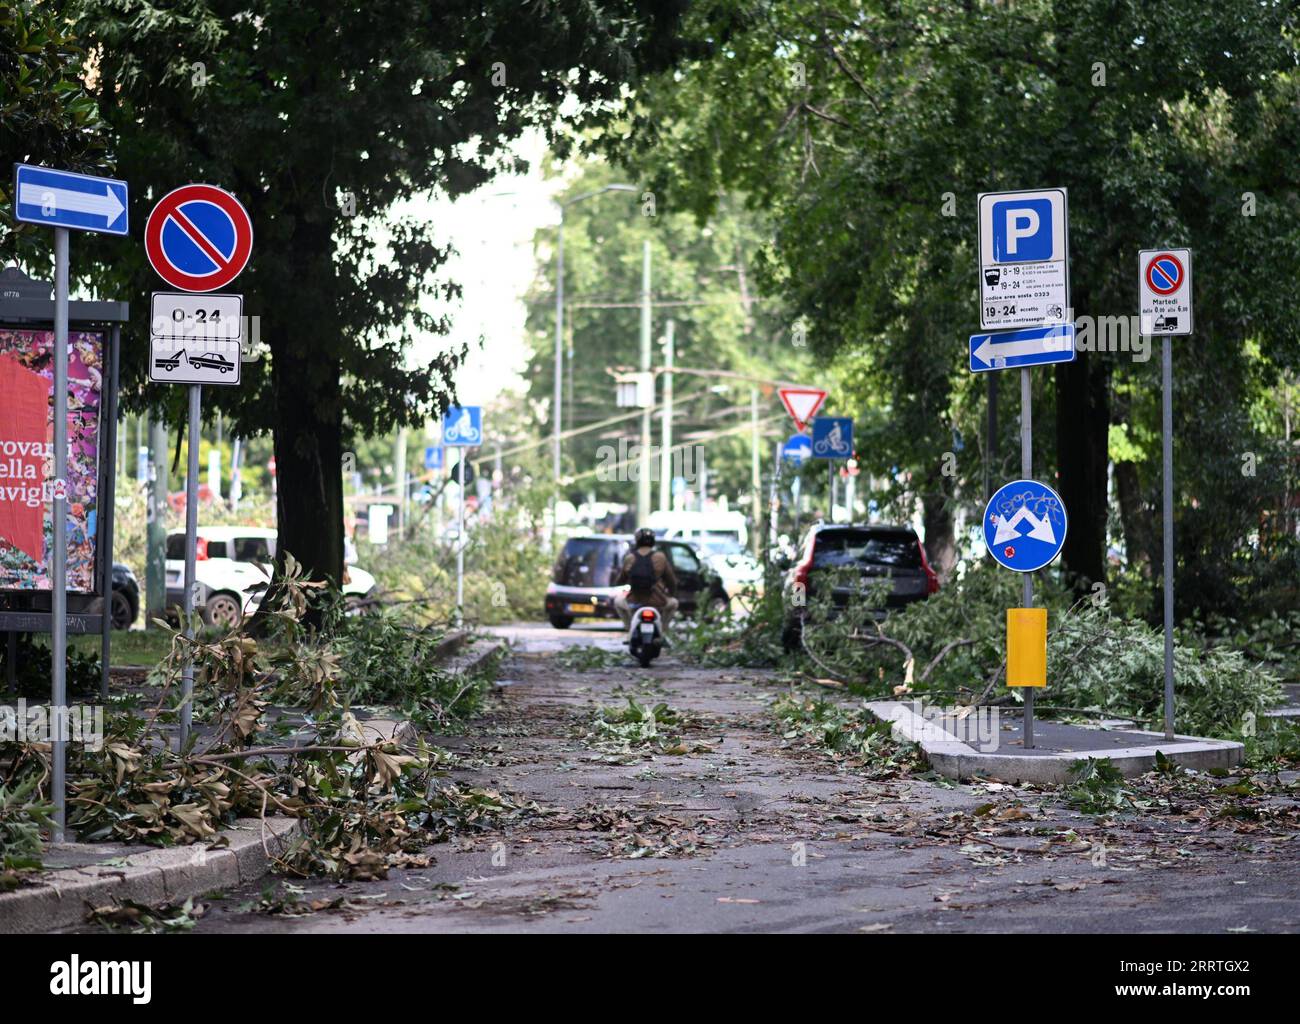 230725 -- MILAN ITALY, July 25, 2023 -- Fallen branches are seen after thunderstorms in Milan, Italy, on July 25, 2023. While the southern two-thirds of Italy struggled under the oppressive heat, most of the northern area was pelted by thunderstorms and over-sized hail. Media reports said the emergency services in Milan had responded to more than 200 requests for help related to flooding, fallen trees, and damage to cars and homes, since a severe storm hit the city late Monday. Str/Xinhua ITALY-MILAN-THUNDERSTORM-HAIL-AFTERMATH Stringer PUBLICATIONxNOTxINxCHN Stock Photo